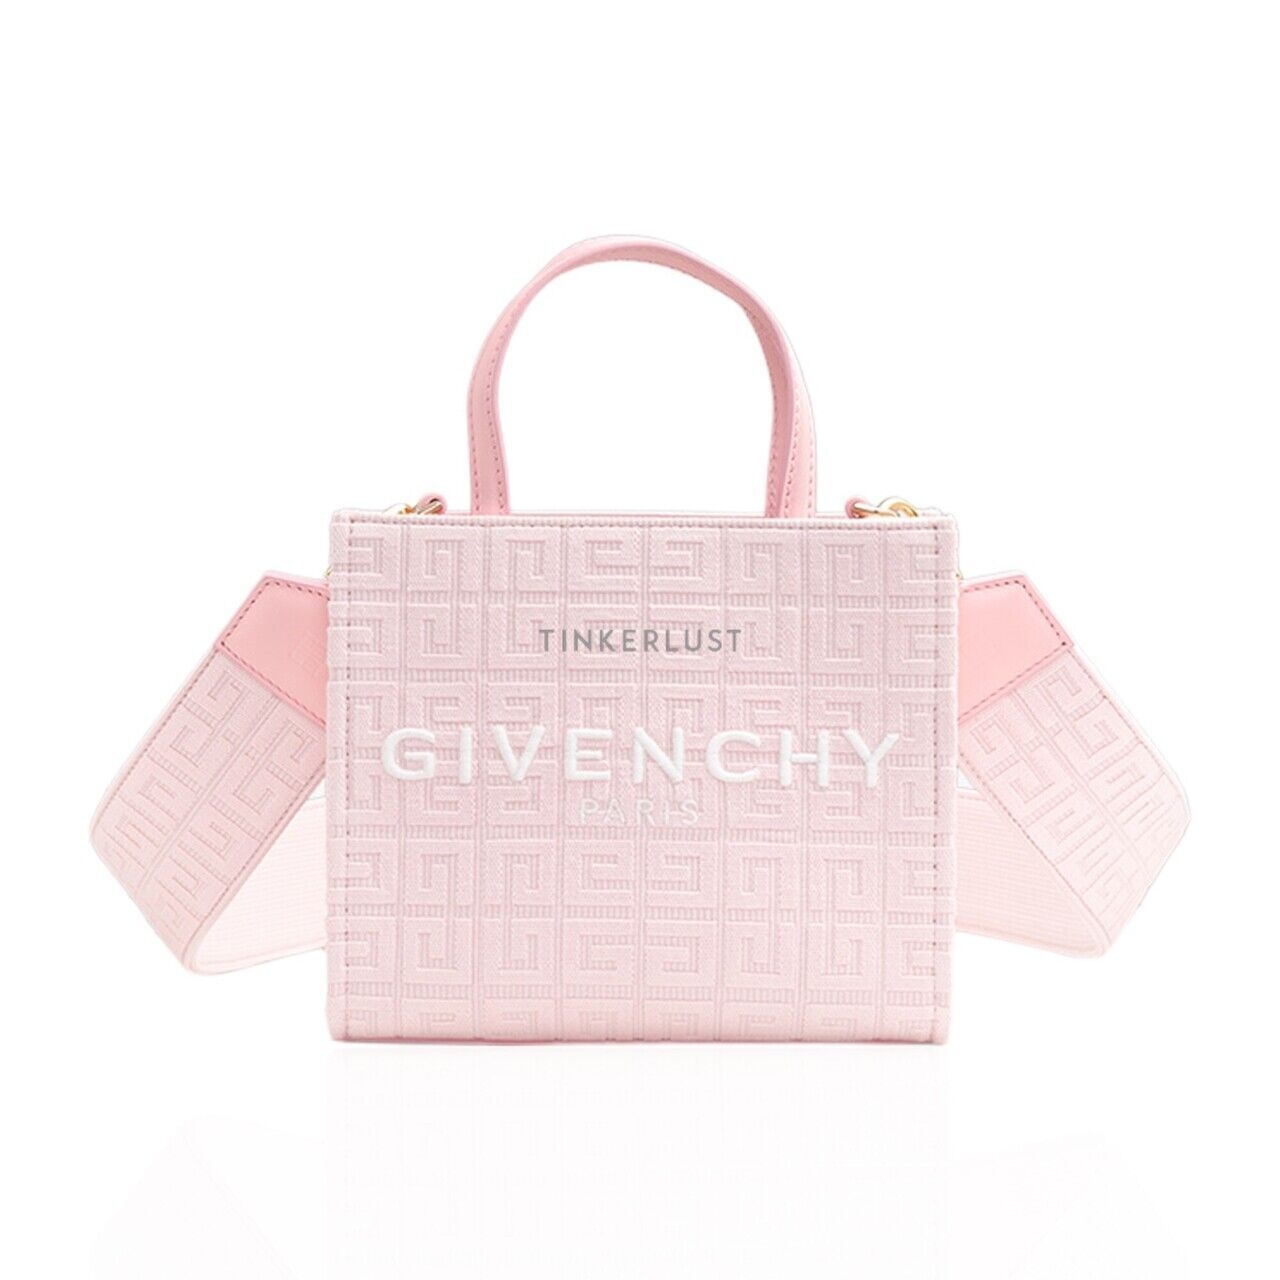 Givency Mini Embroidered G Shopper in Tender Pink Canvas with 4G Debossed Satchel Bag